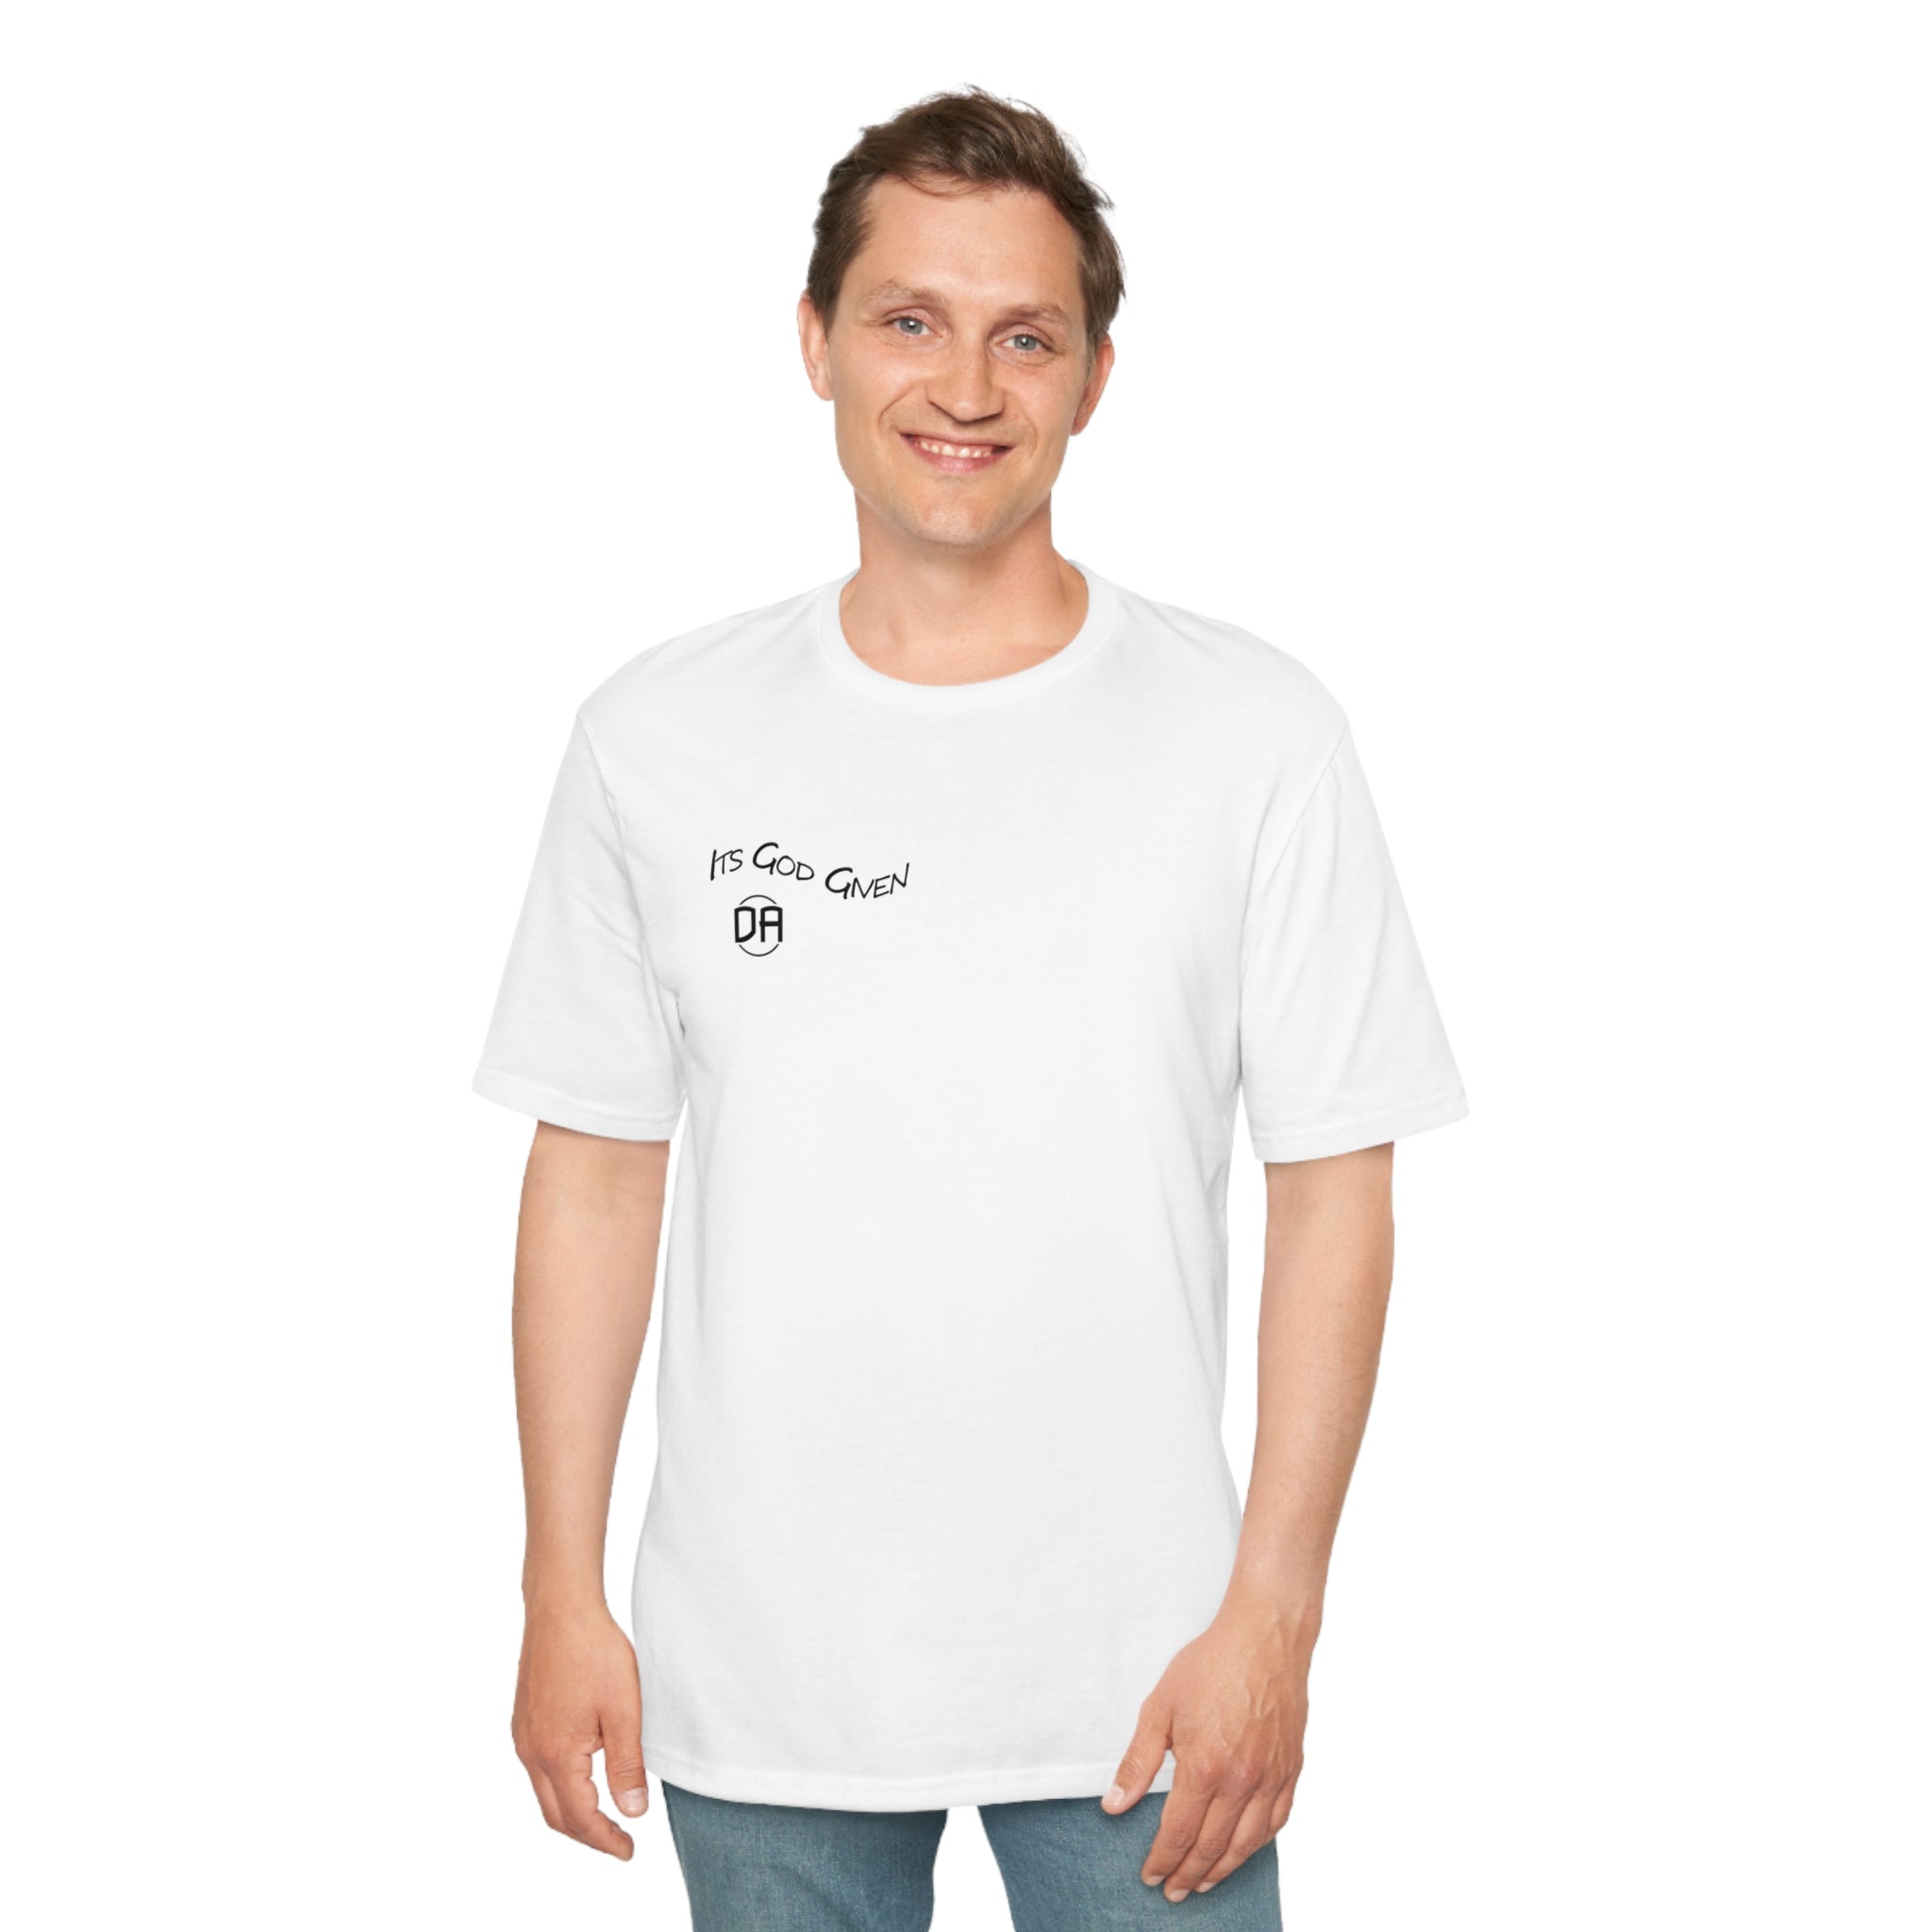 Pitching Fastball Tee